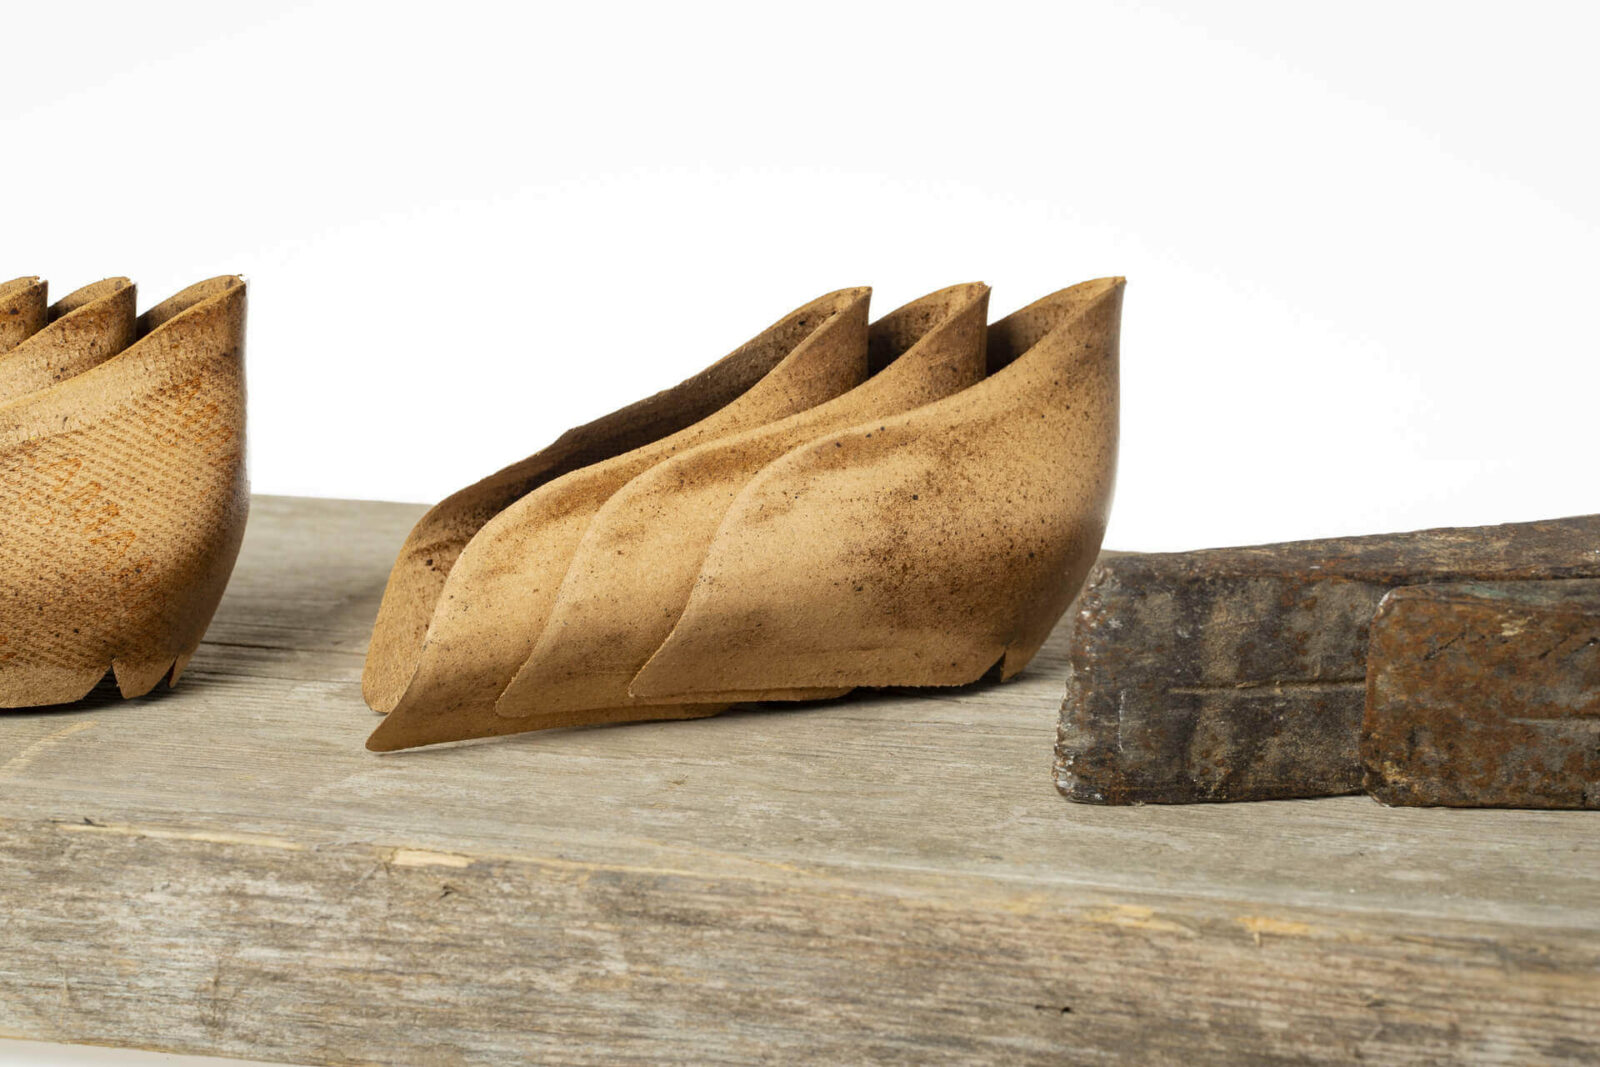 Soles – the perfect basis for every Sioux shoe.